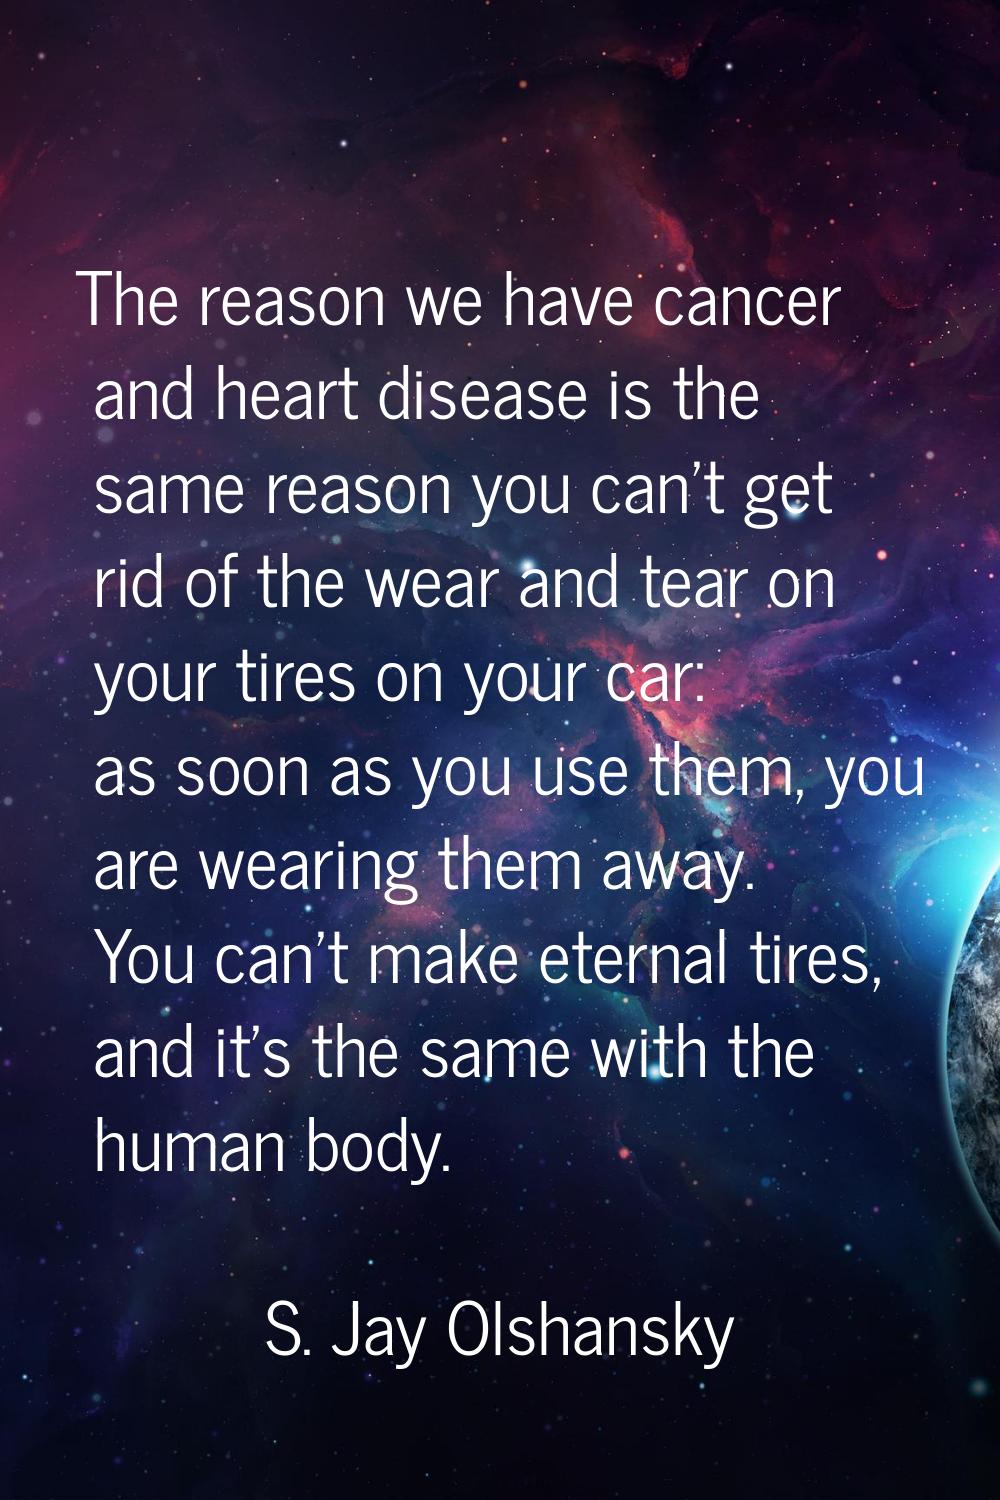 The reason we have cancer and heart disease is the same reason you can't get rid of the wear and te